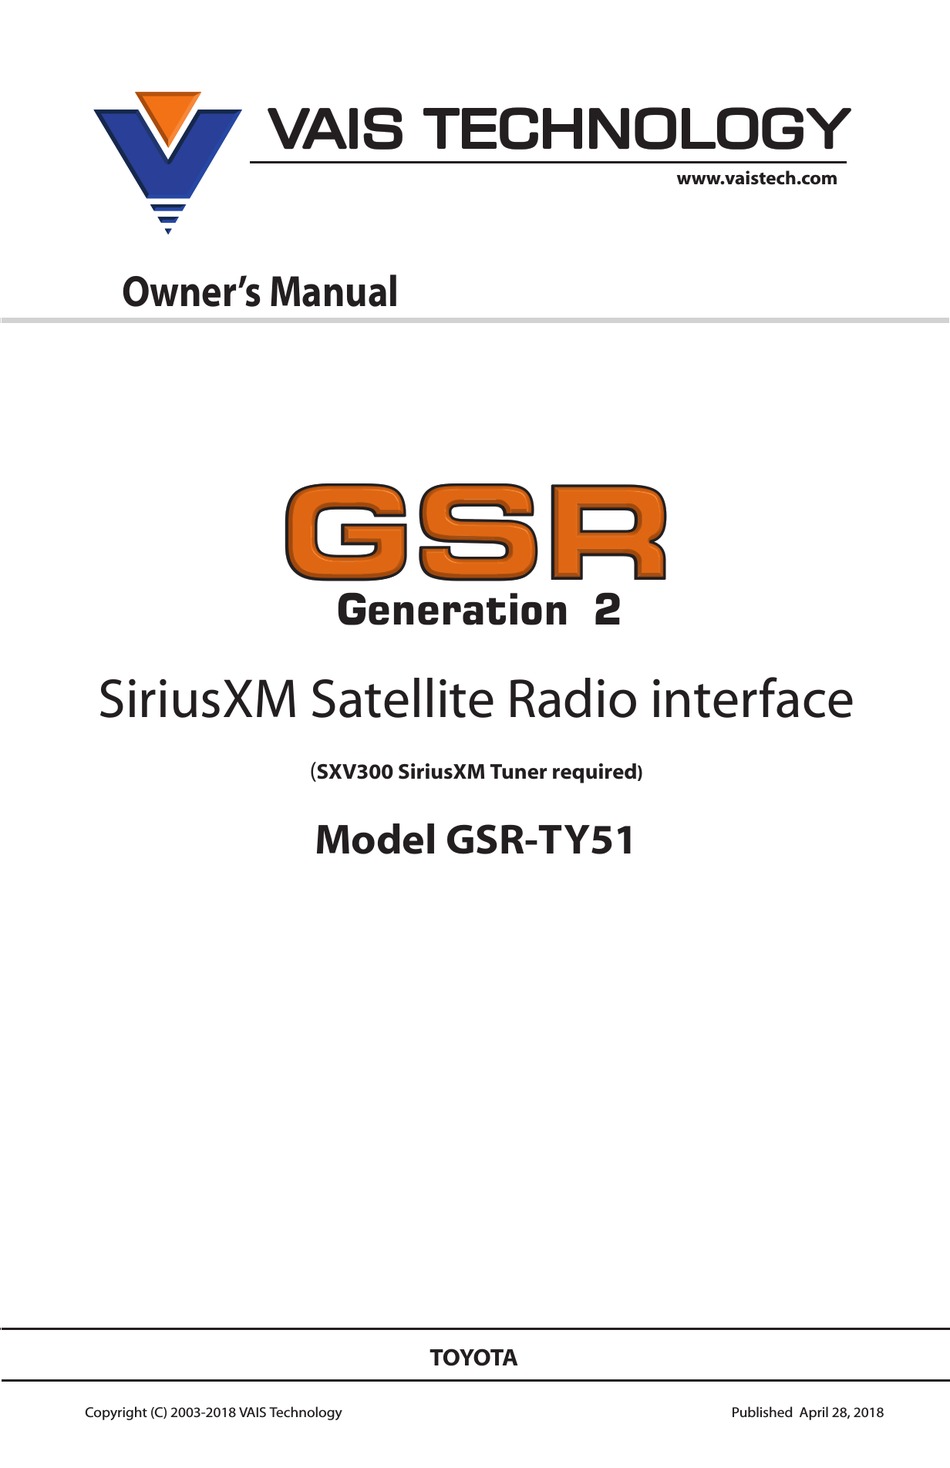 VAIS TECHNOLOGY GSR GENERATION 2 SERIES OWNER'S MANUAL Pdf Download